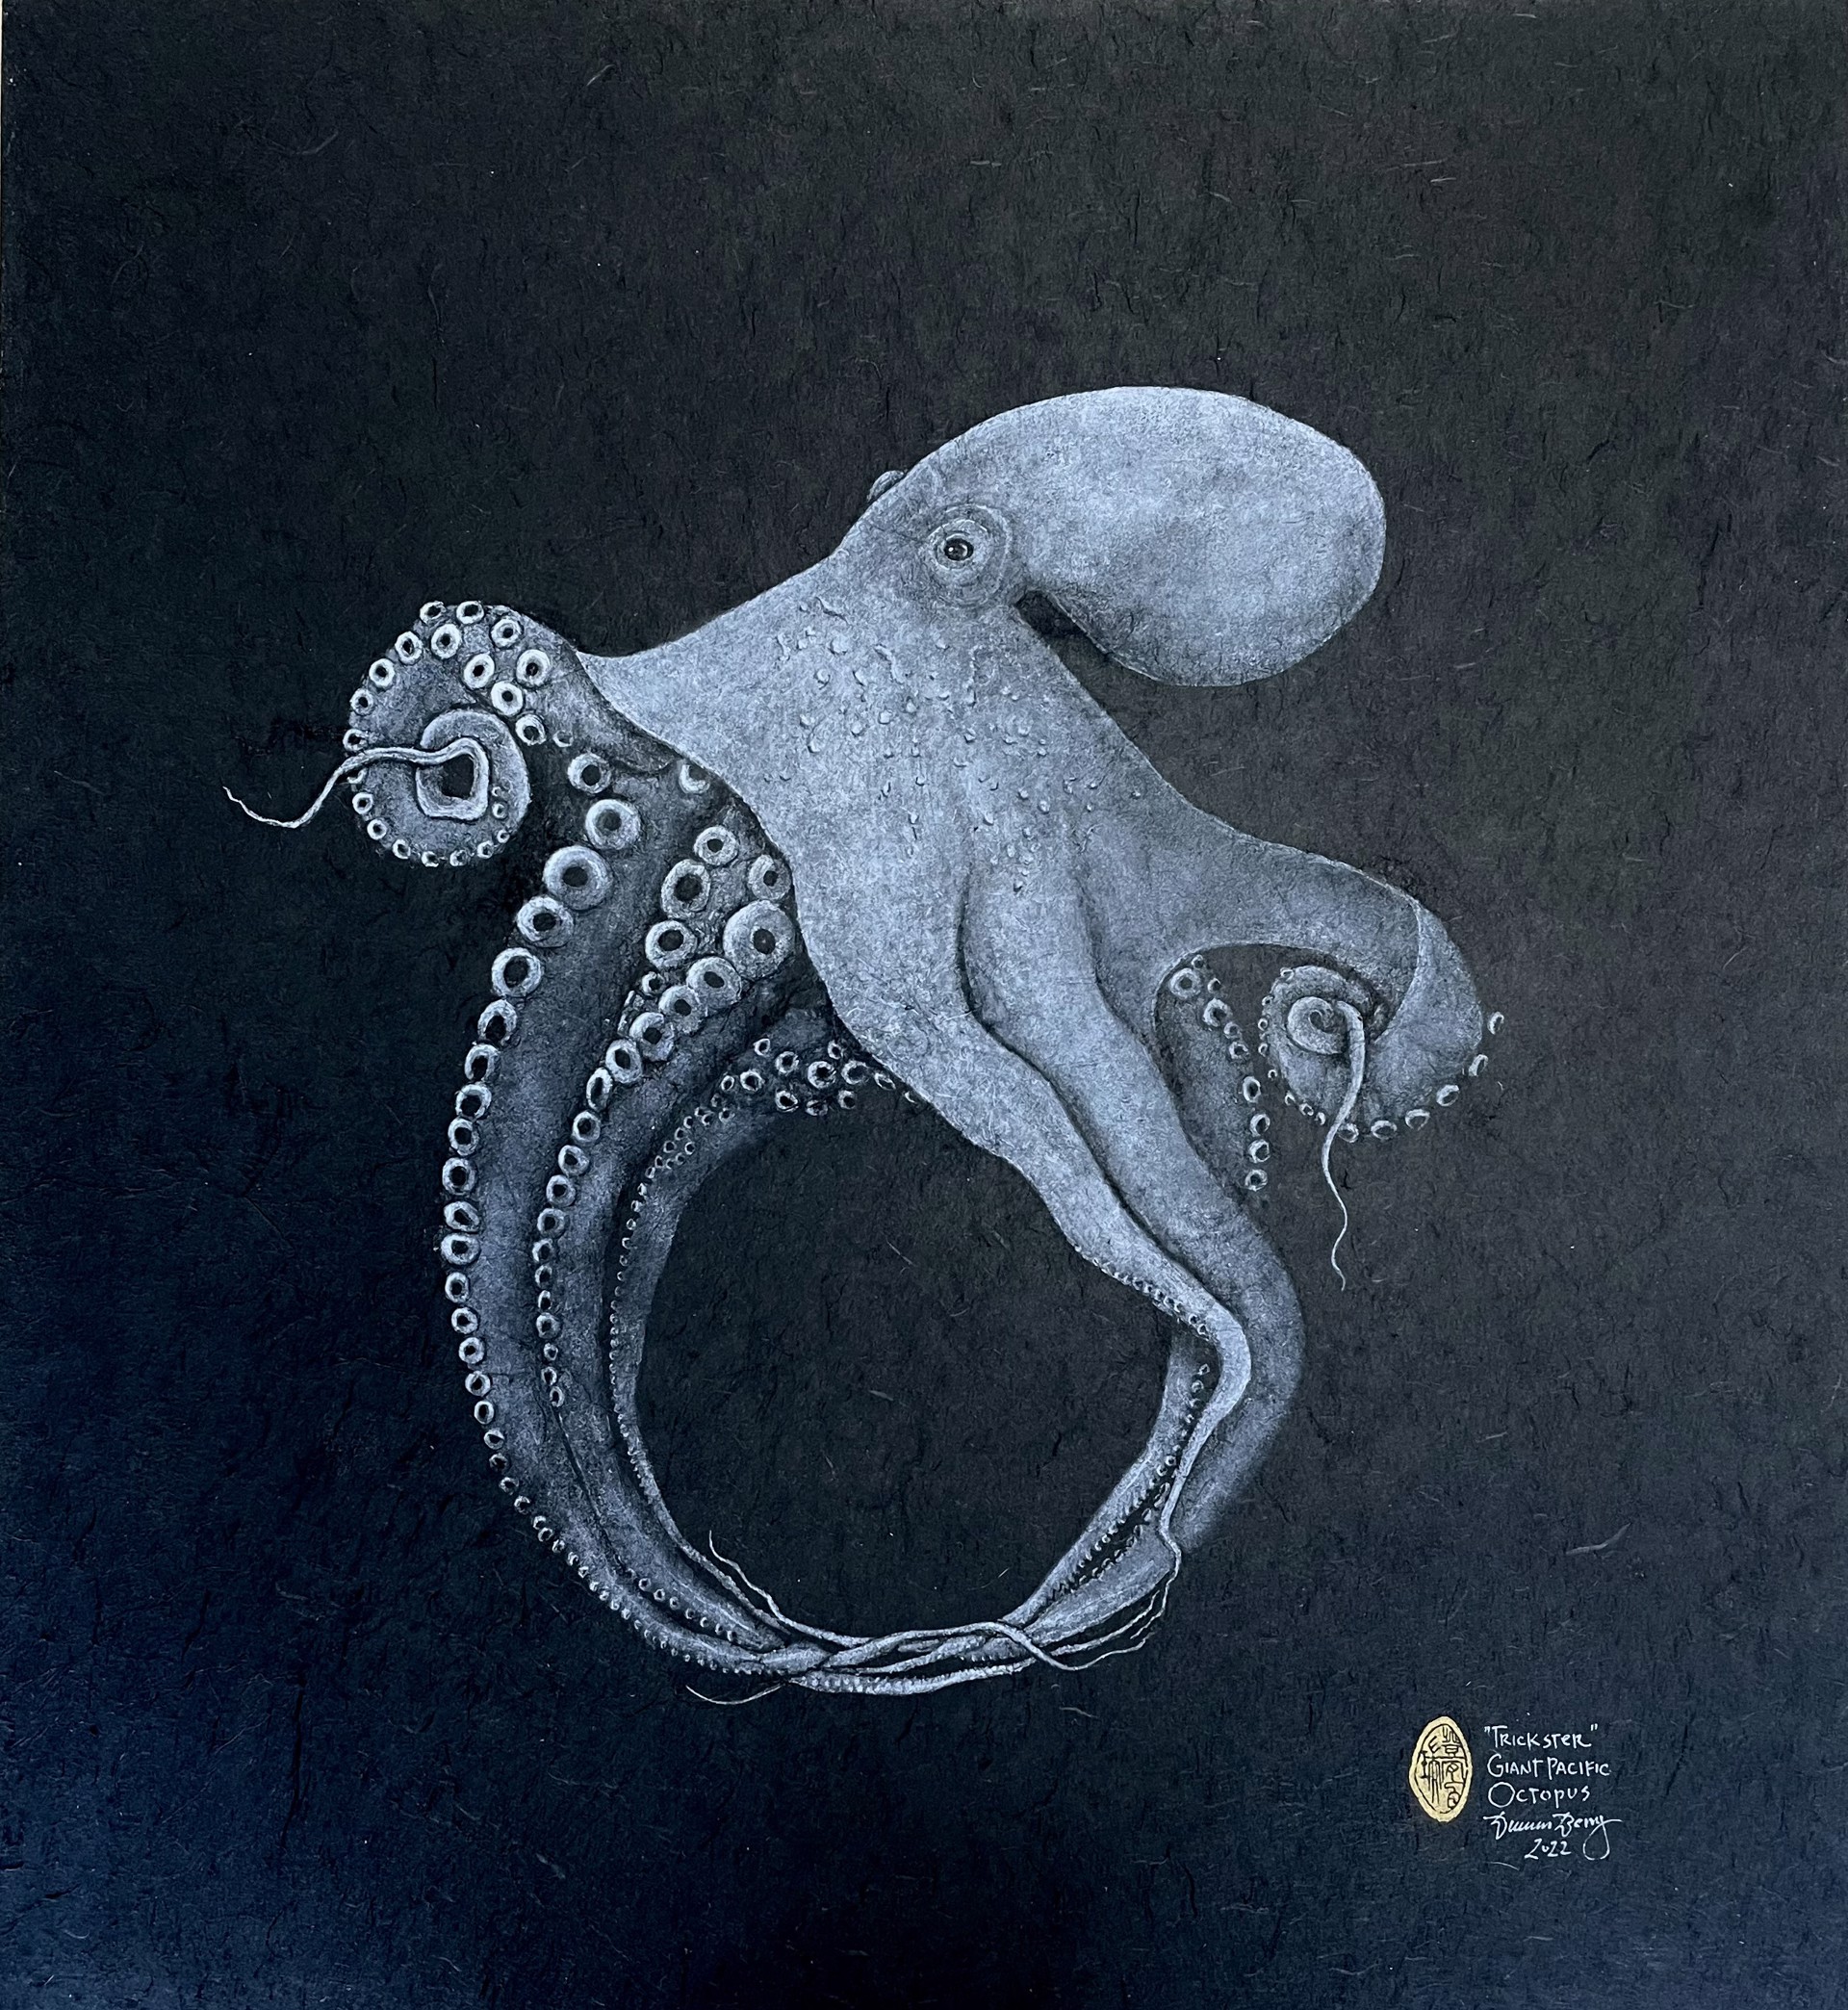 Trickster (Giant Pacific Octopus) by Duncan Berry